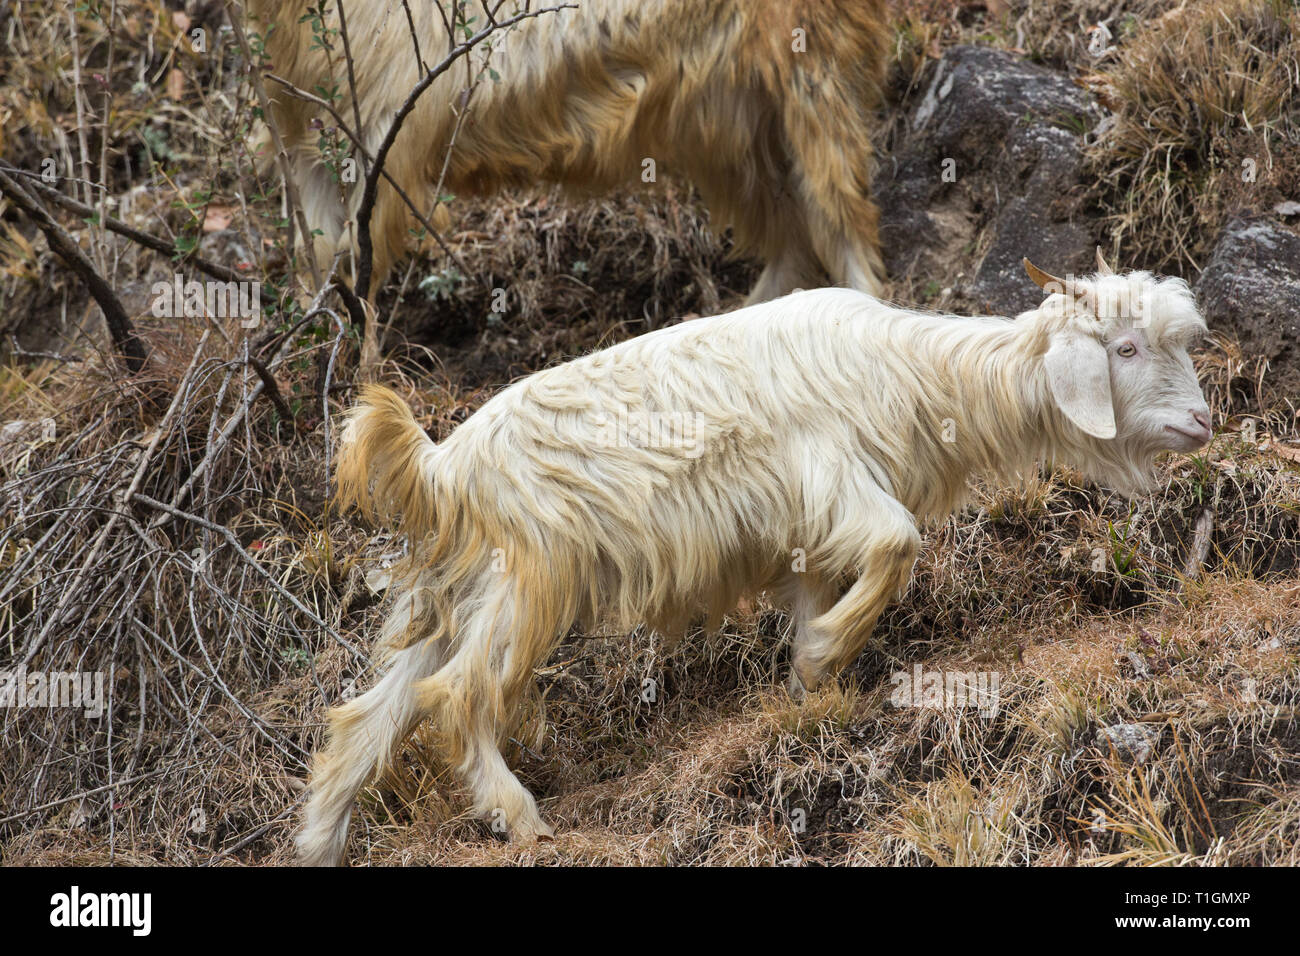 Domestic Goat  (Capra hircus). A mountain breed, one of a herd, a horned animal. Goat’s horns have a well-developed keel on the anterior edge. This is a younger animal with horns growing. Note the goats uplifted tail. India. Stock Photo